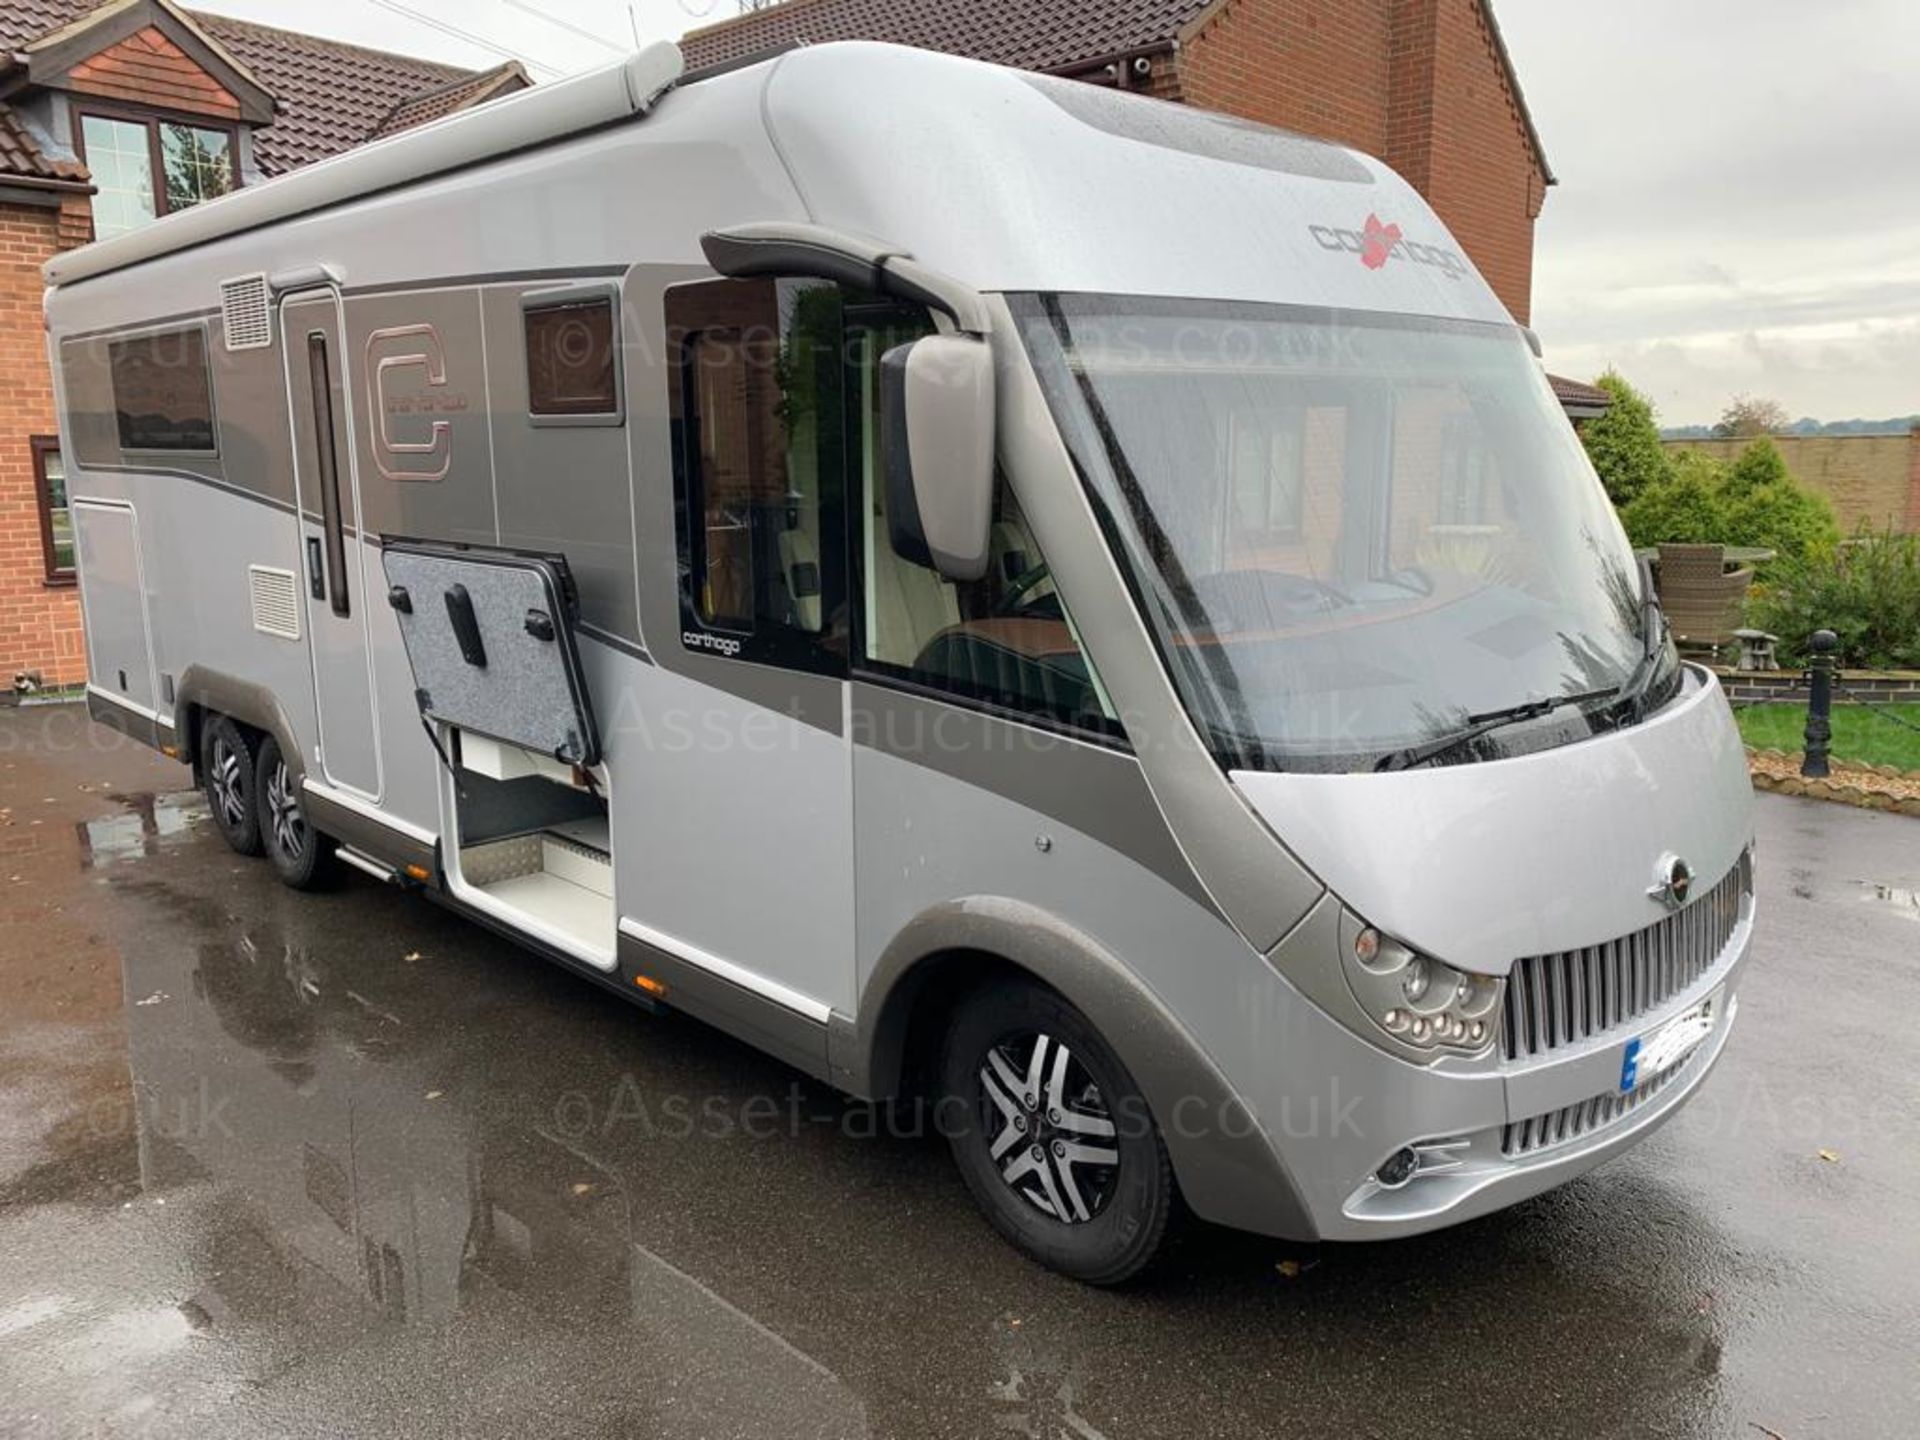 2020 CARTHAGO LINER-FOR-TWO 53L MOTORHOME, SHOWING 4529 MILES, MINT CONDITION *NO VAT* - Image 8 of 33